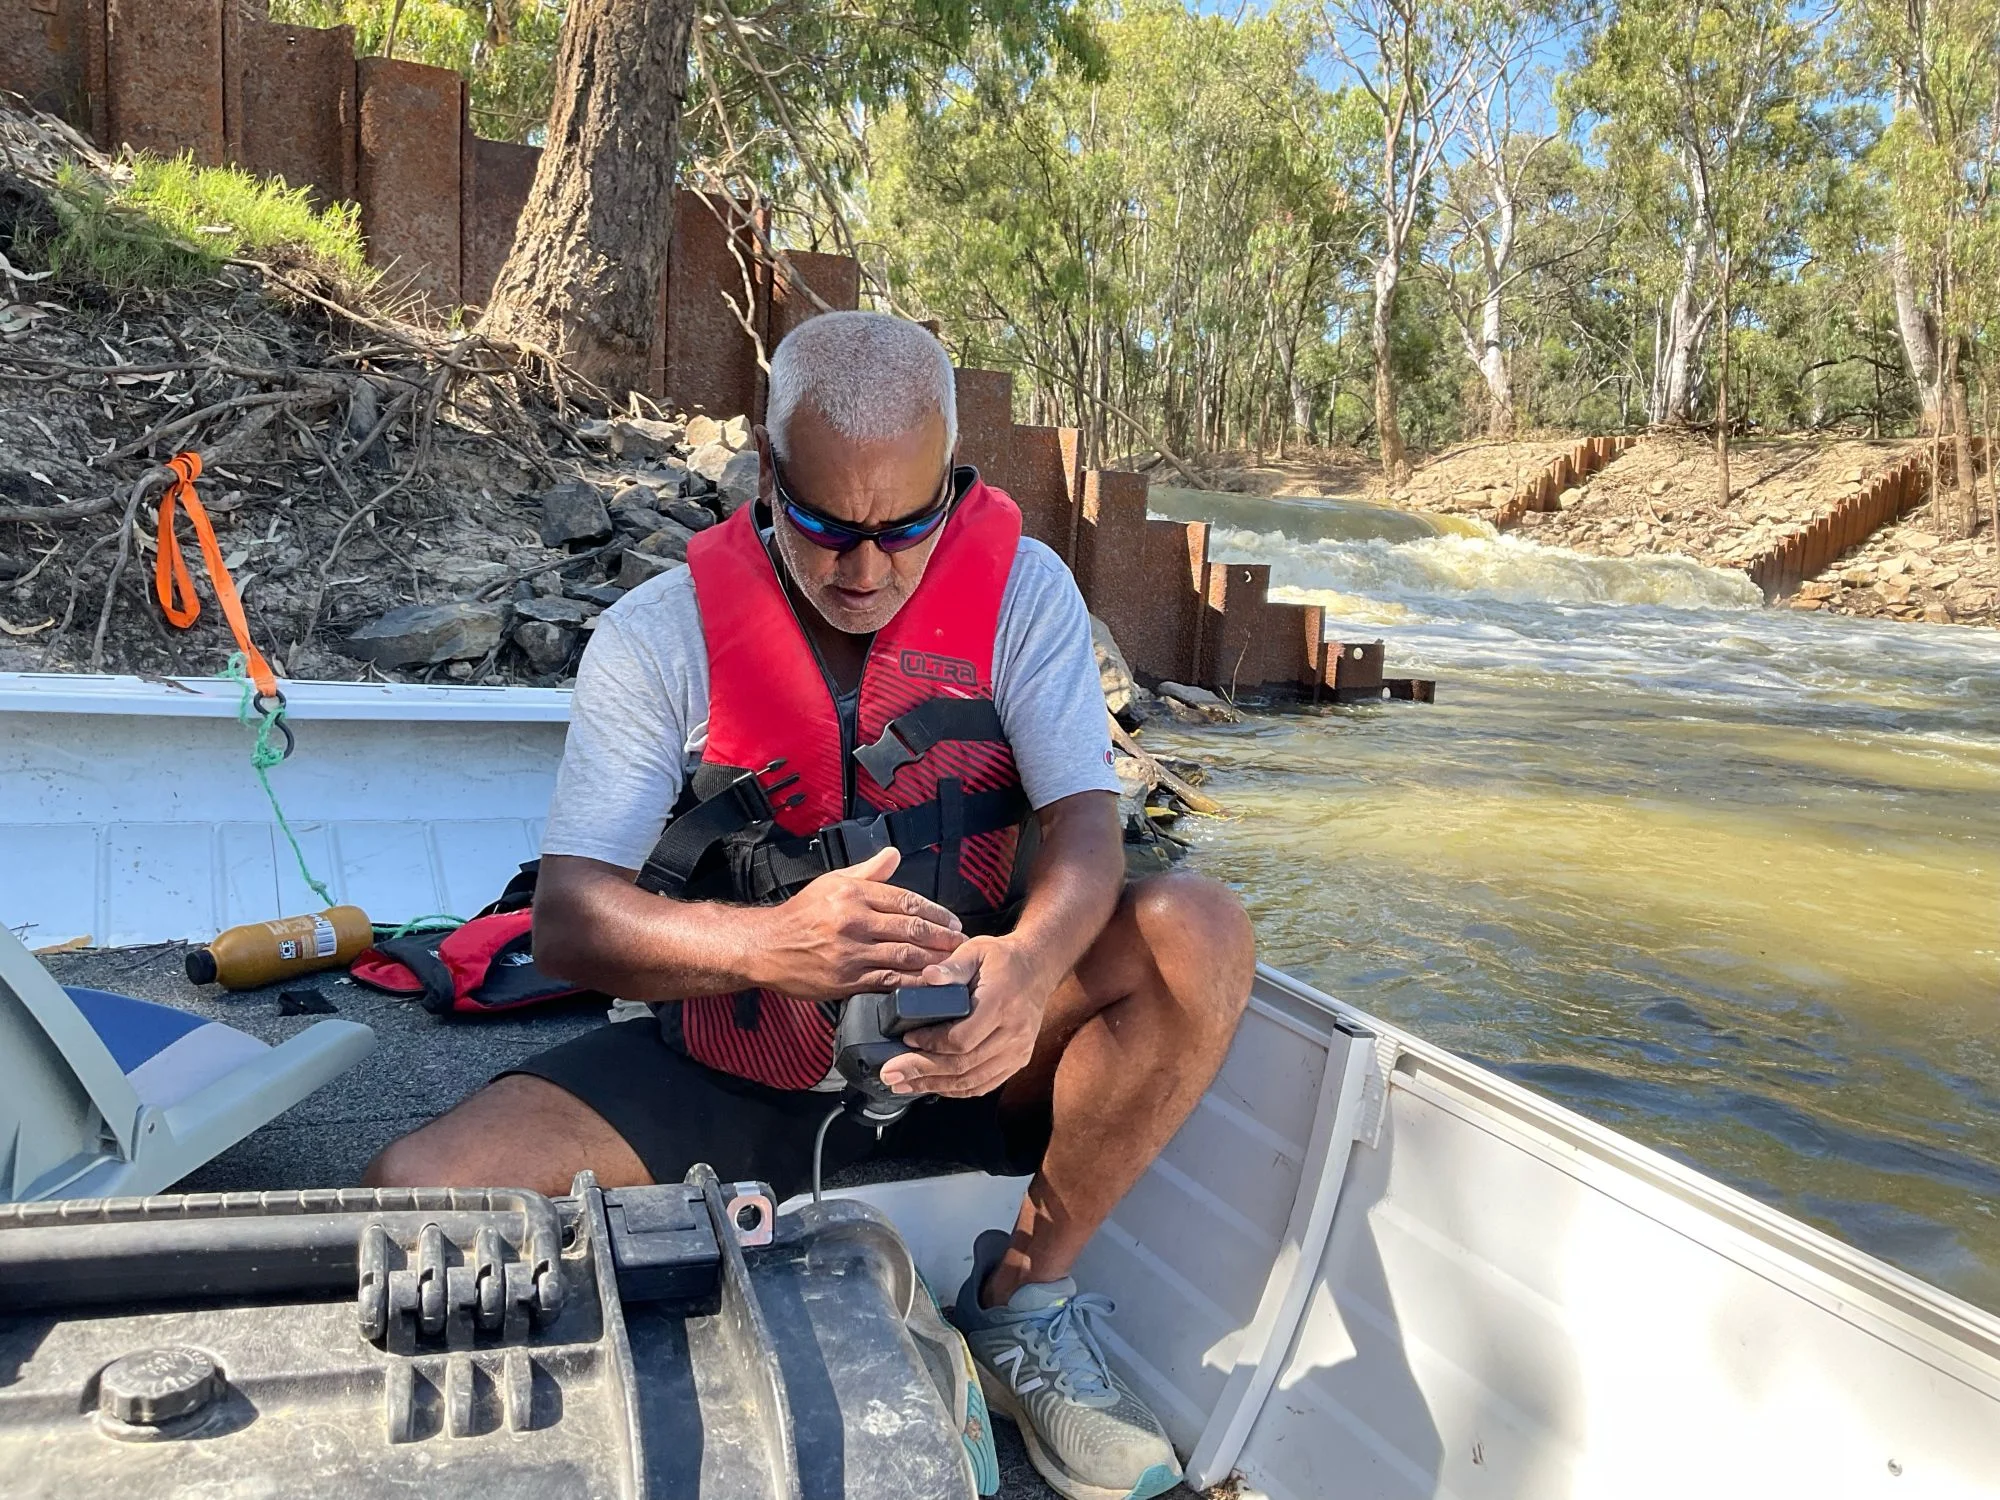 Anthony ‘Ant’ Jones, from Deniliquin, checks the readings on the water quality meter near one of the MIL irrigation escapes from the Mulwala channel, where environmental water has been used to create refuge patches in the Edward/Kolety River. Photo credit, Alec Buckley